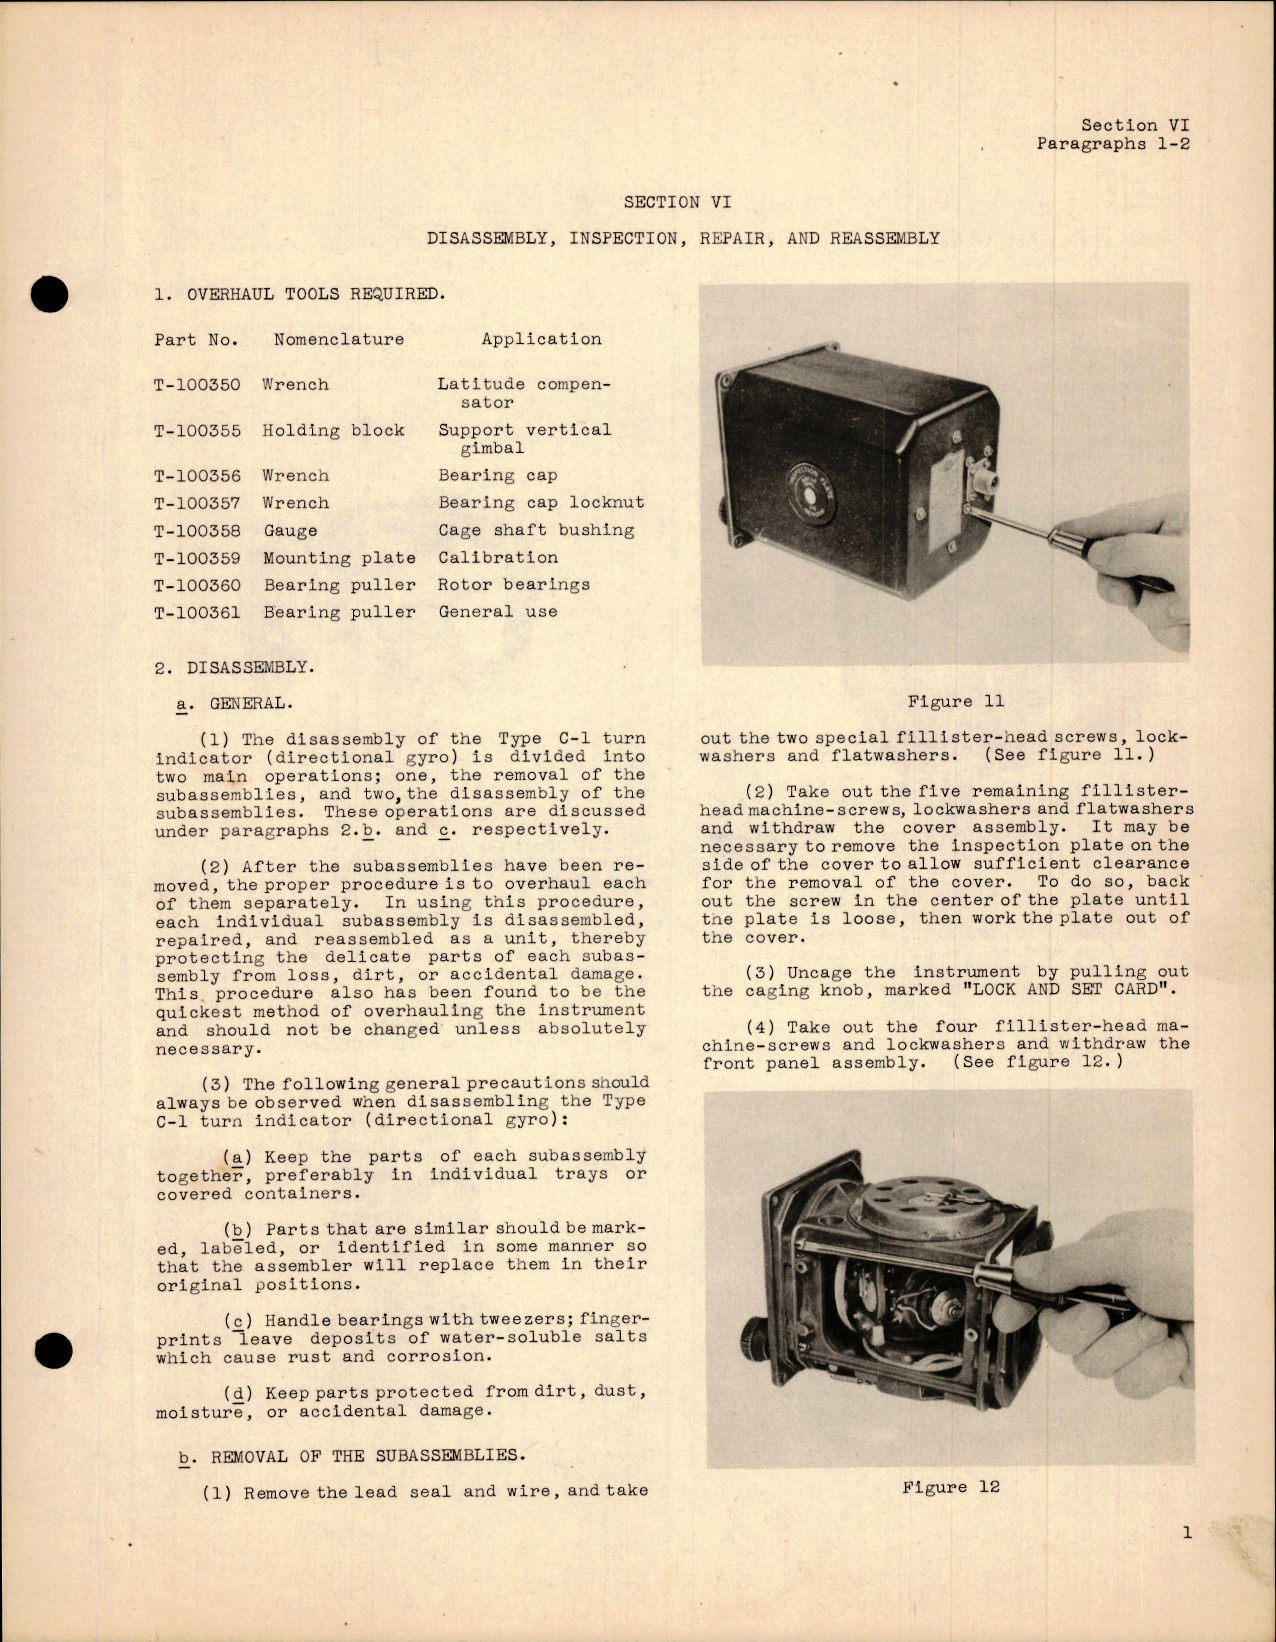 Sample page 5 from AirCorps Library document: Overhaul Instructions for Sperry Turn Indicator, Type C-1